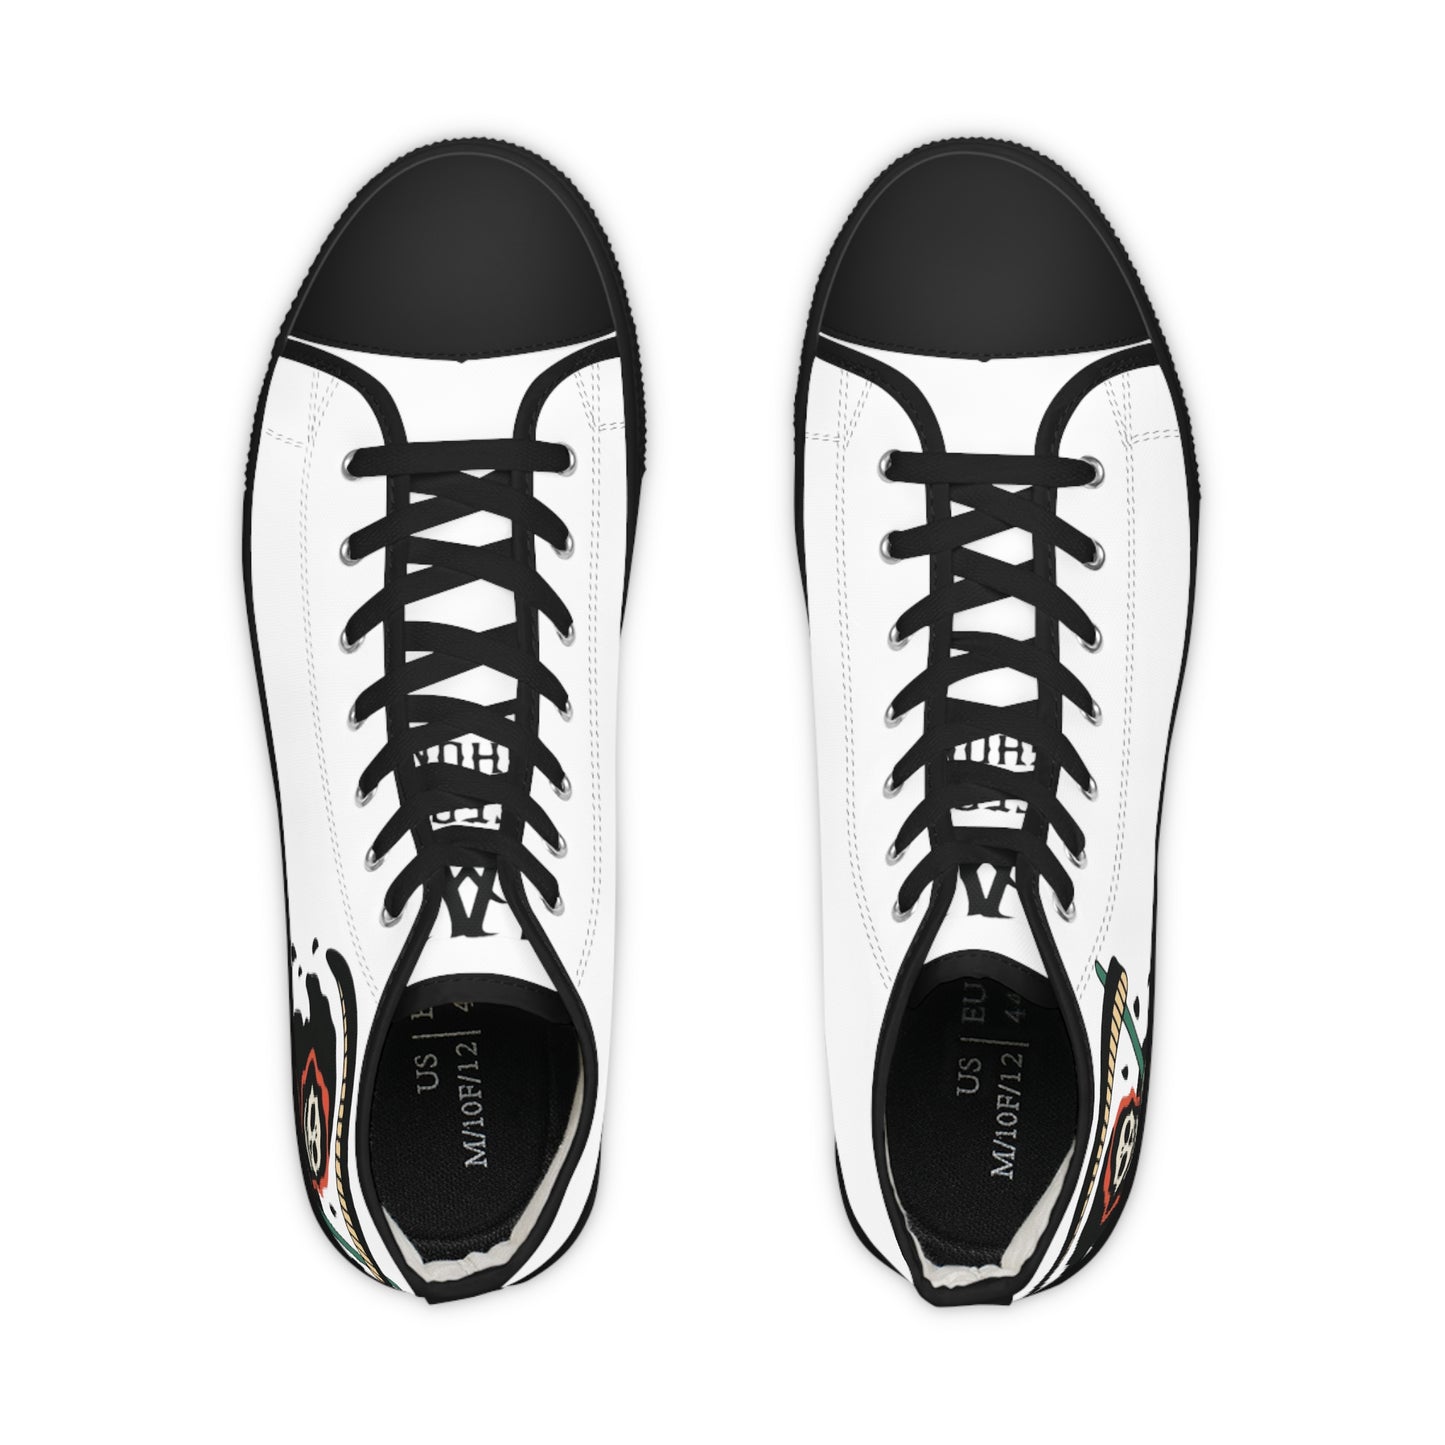 Death before dishonor Men's High Top Sneakers